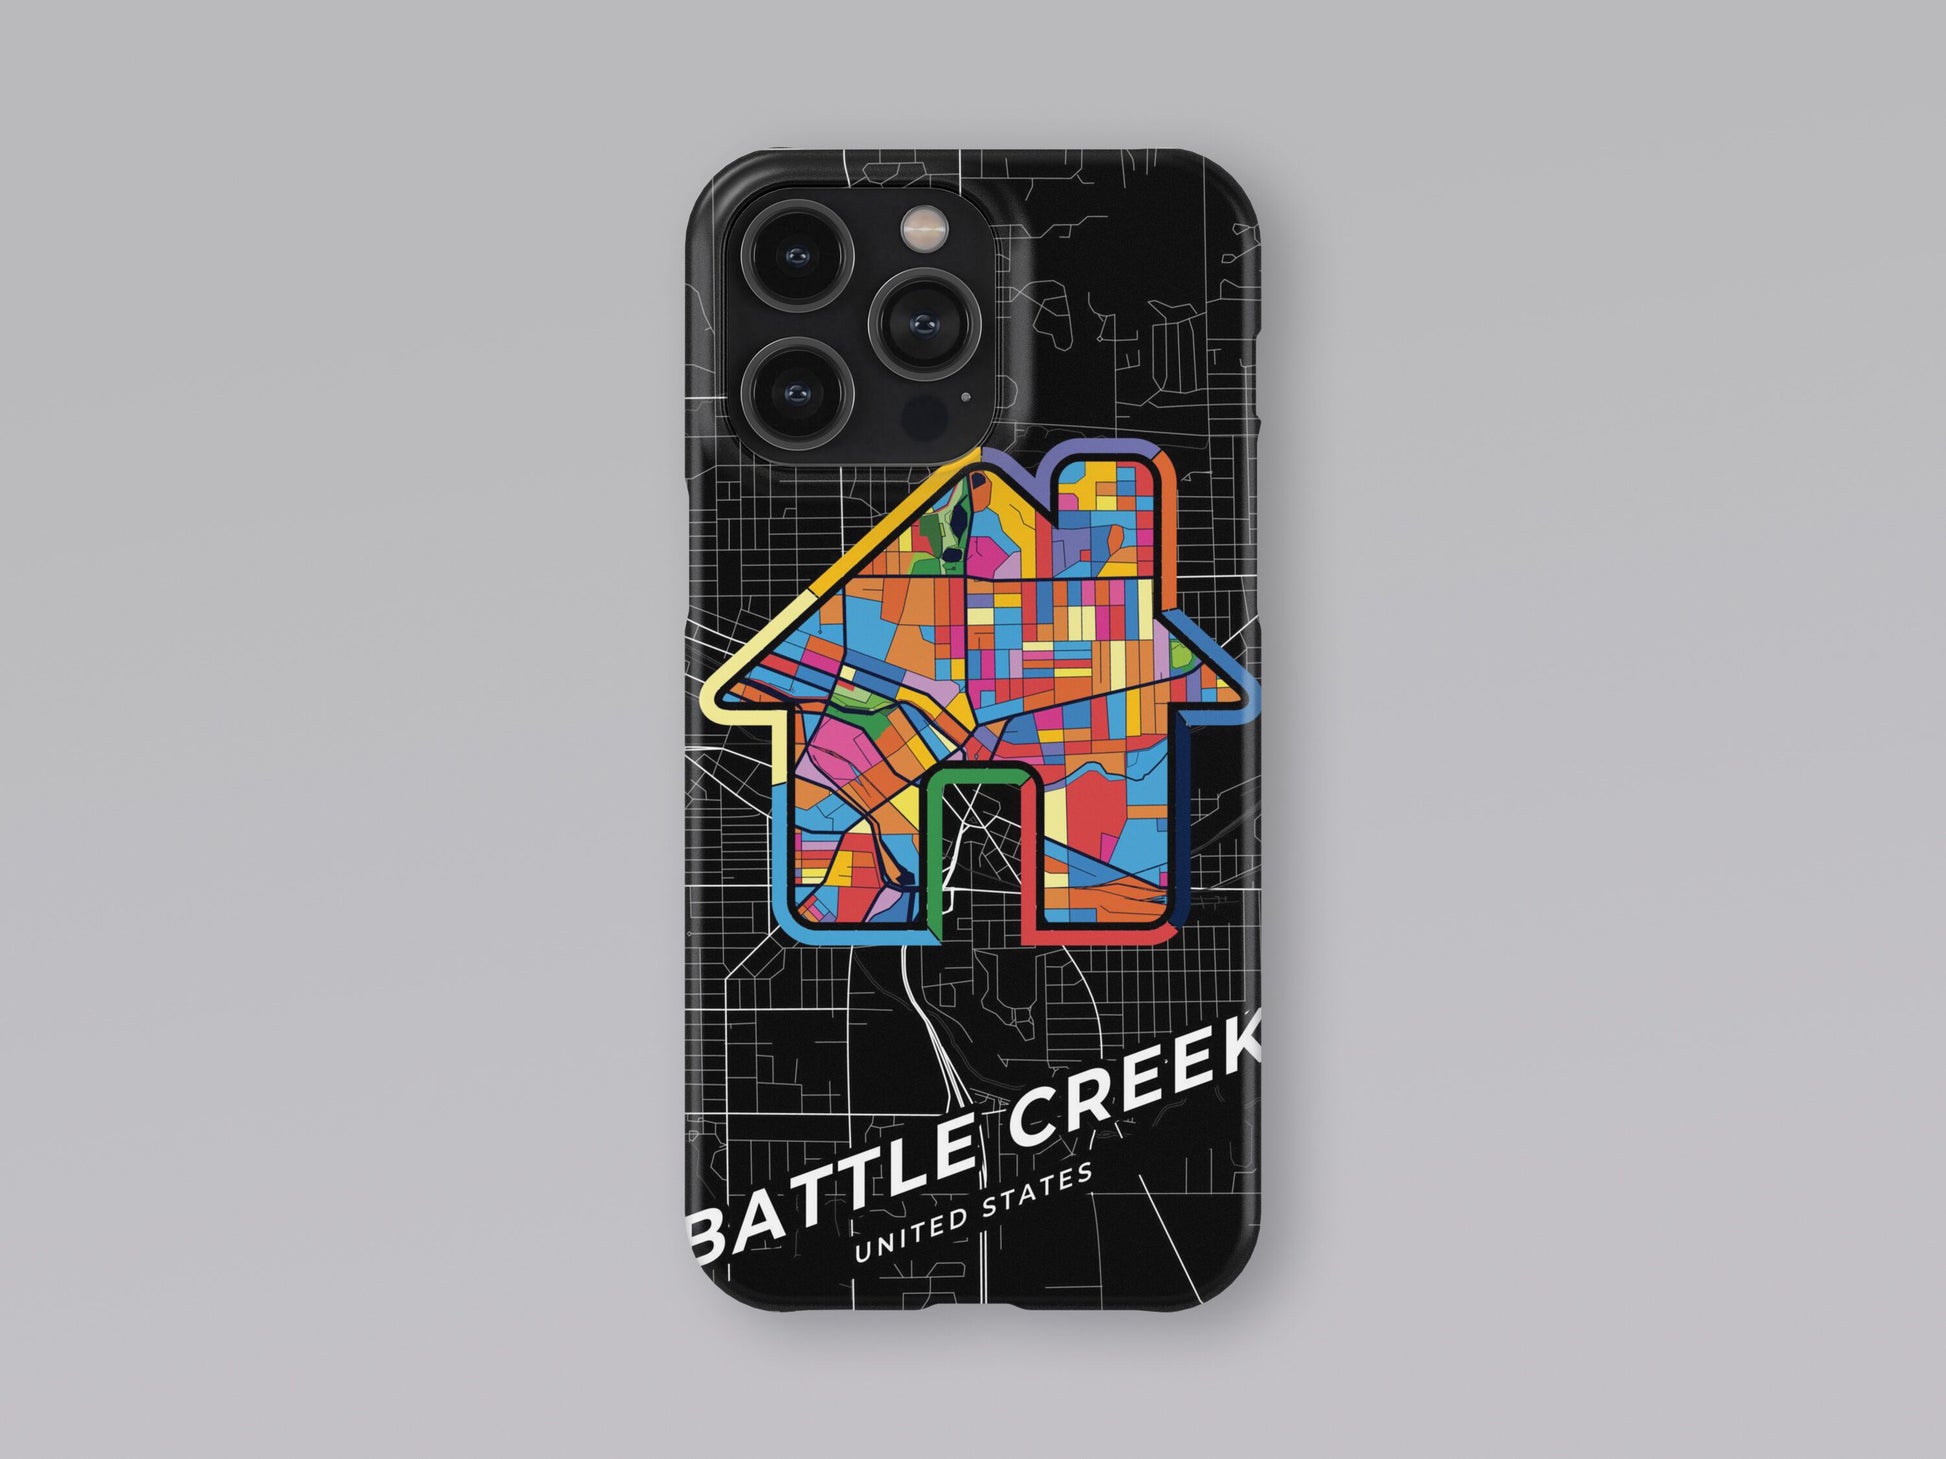 Battle Creek Michigan slim phone case with colorful icon. Birthday, wedding or housewarming gift. Couple match cases. 3